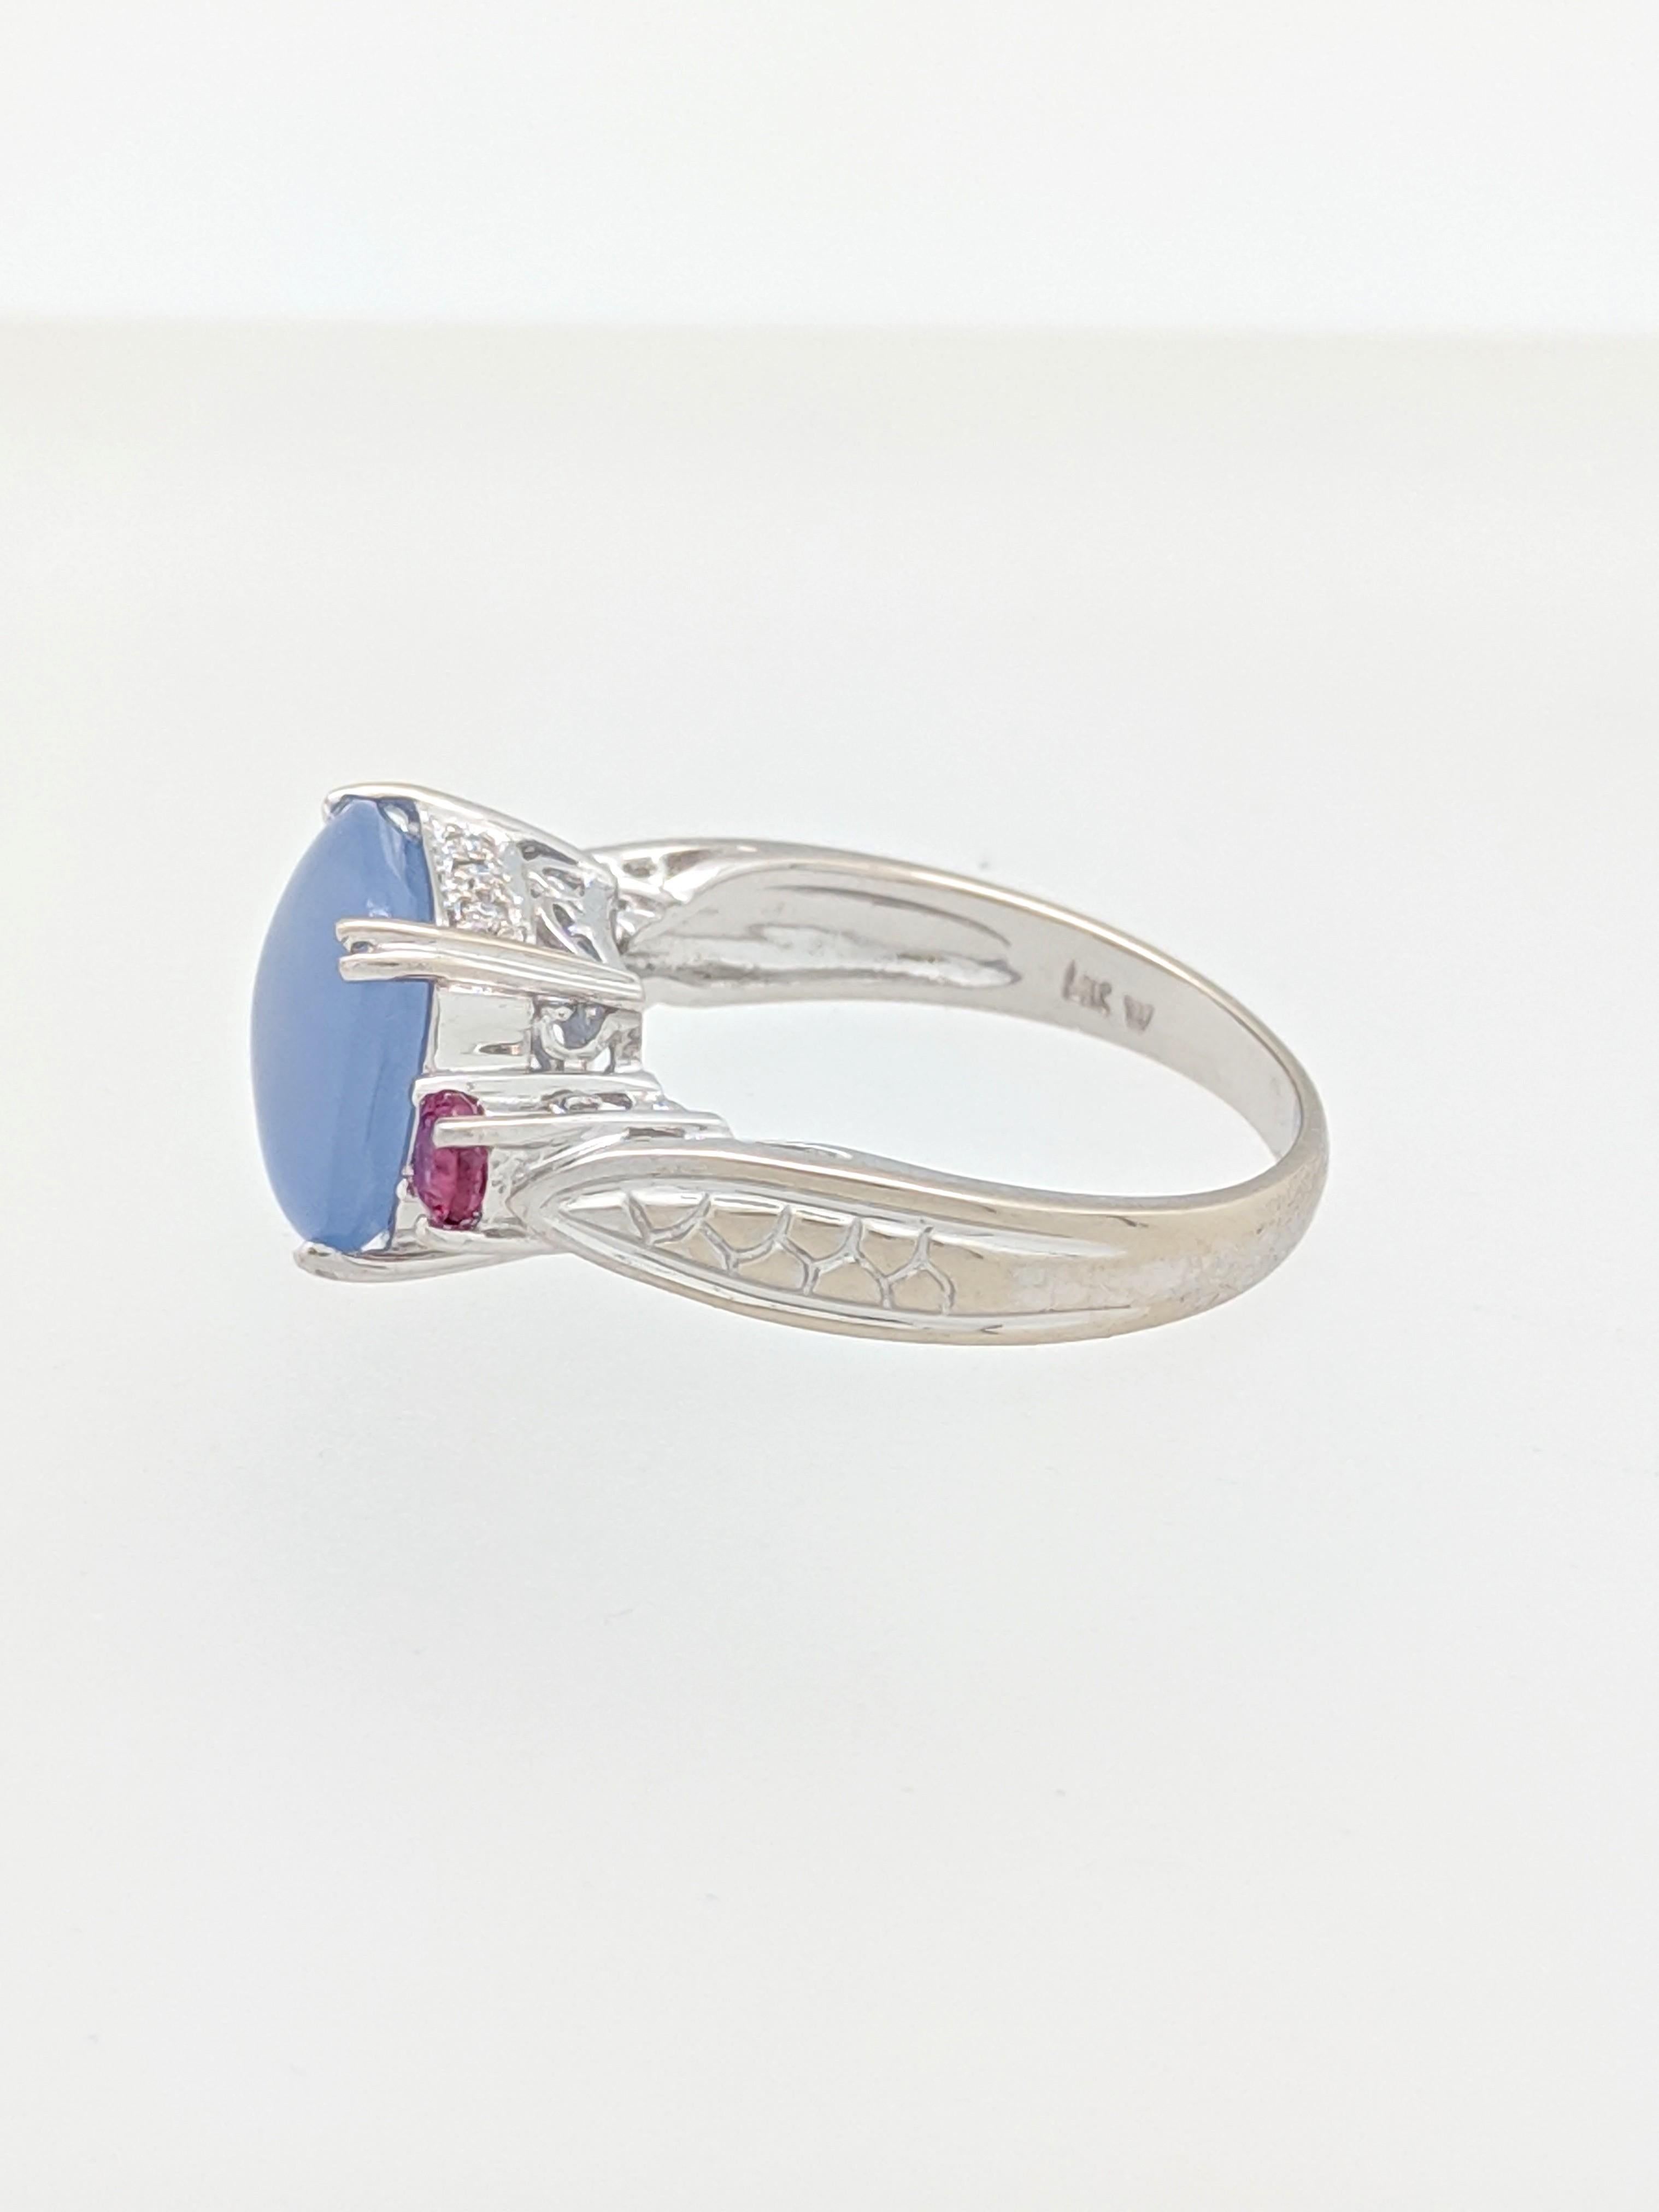 14 Karat White Gold Cabochon Cut Purple Jade and Pink Tourmaline Ring For Sale 2